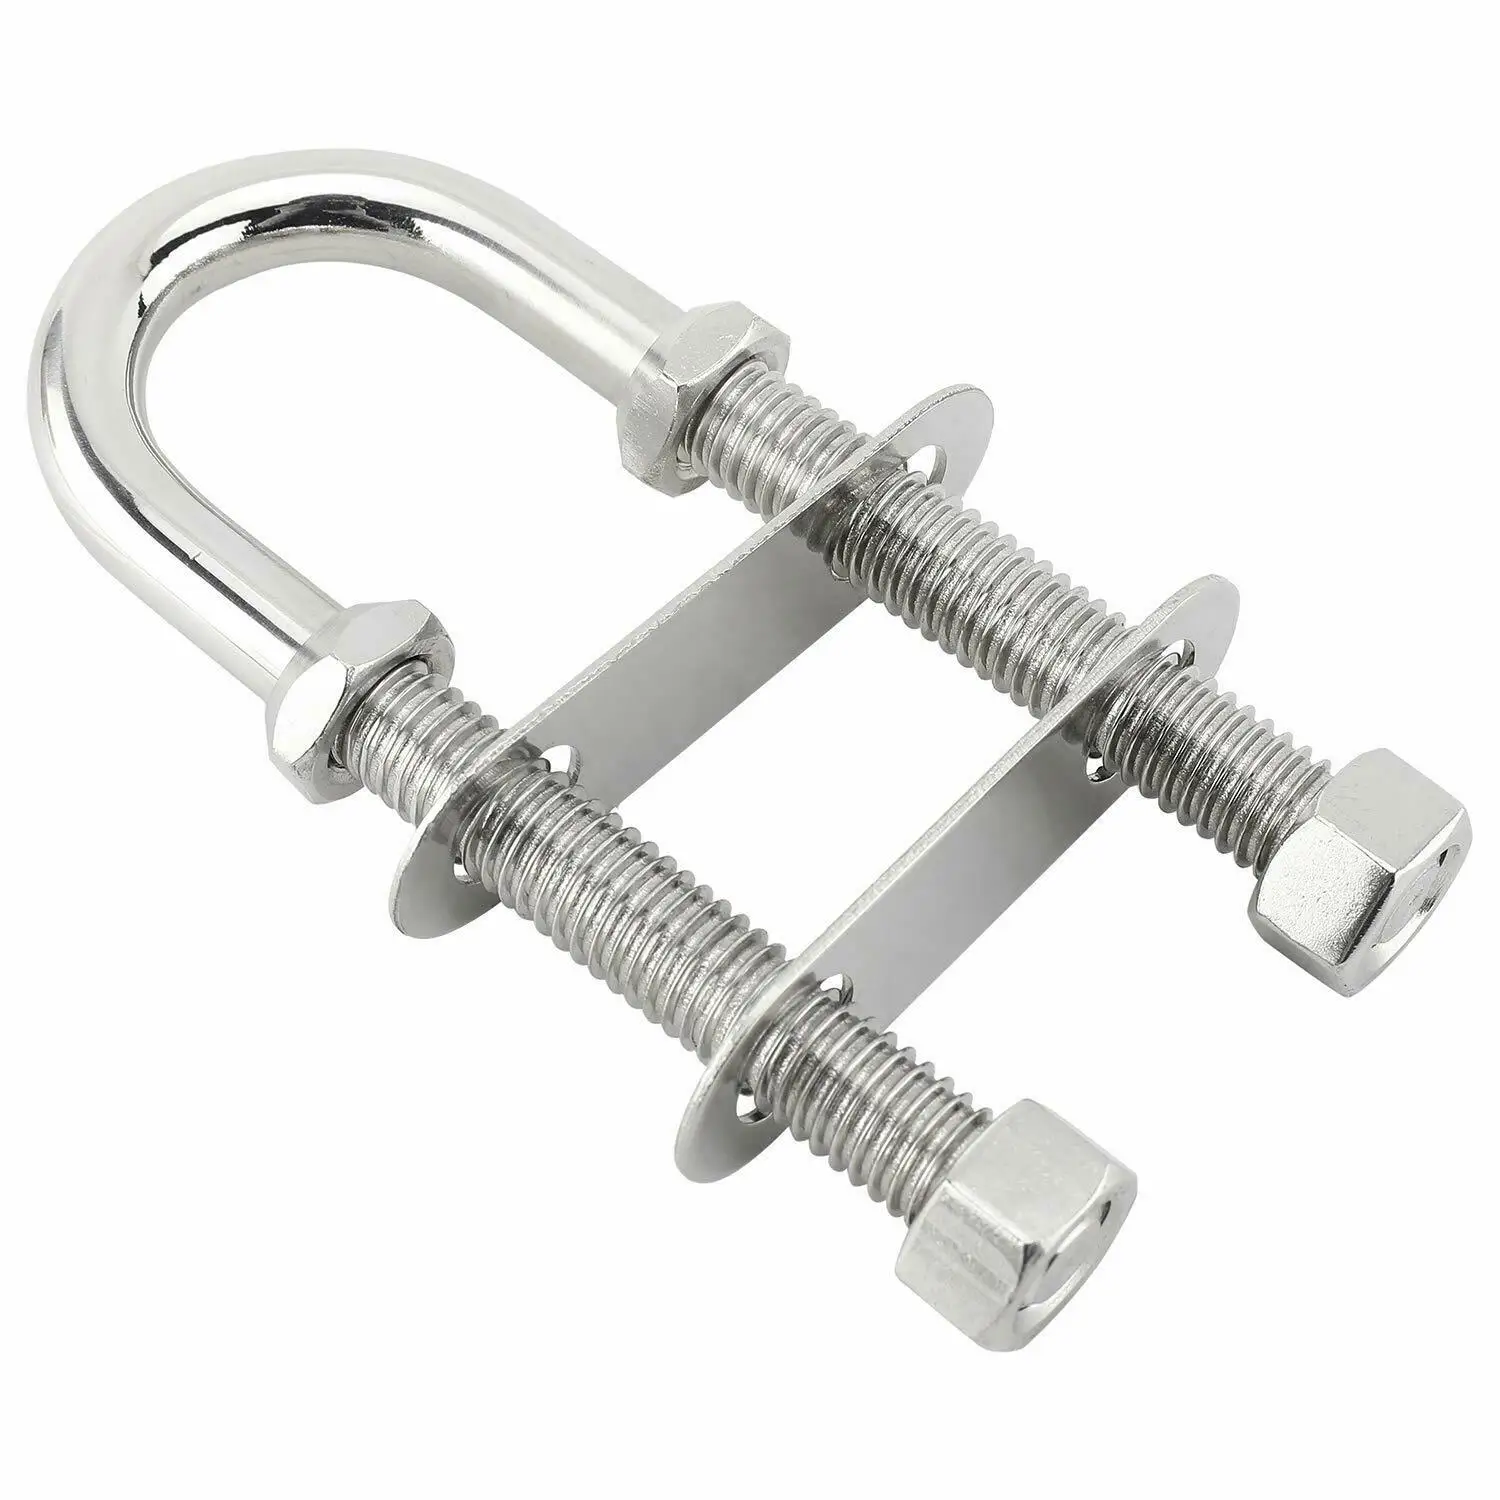 

304 Stainless Steel M12 Bow Stern Eye Tie Down U-Bolt Cleat Ring Rope Rigging for Boat Marine Hardware Accessories